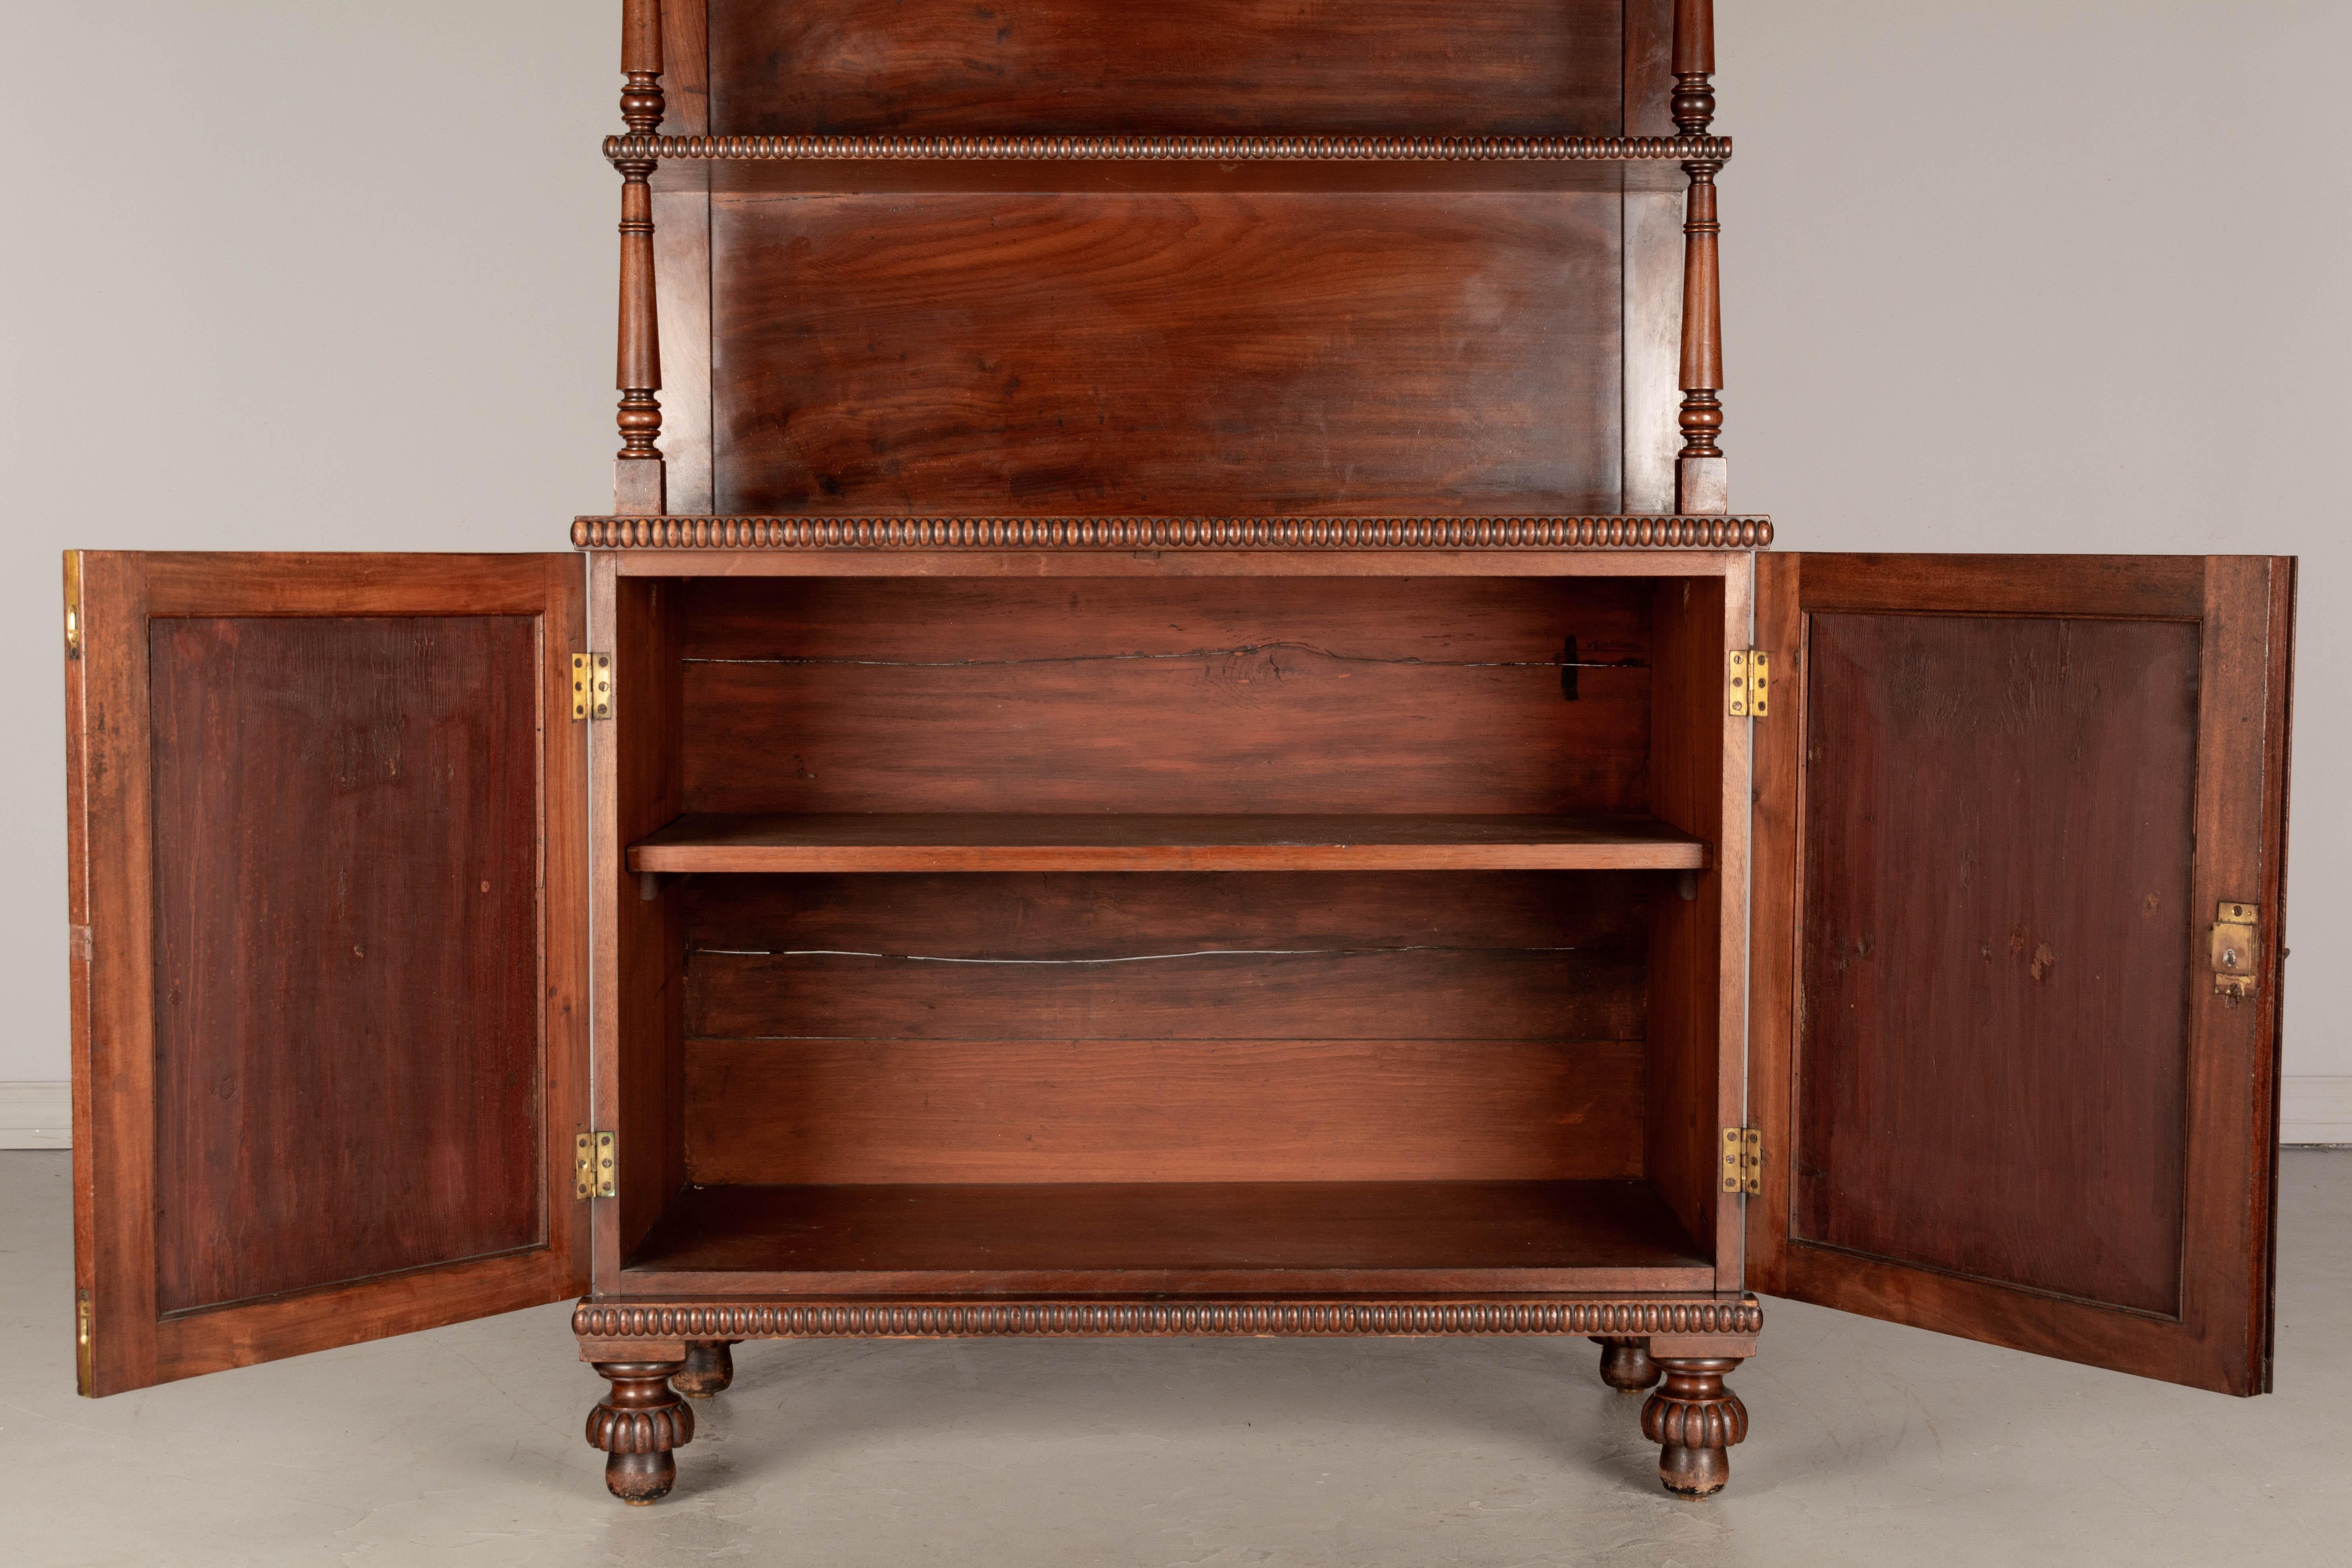 19th Century English Mahogany Sideboard with Shelves In Good Condition For Sale In Winter Park, FL